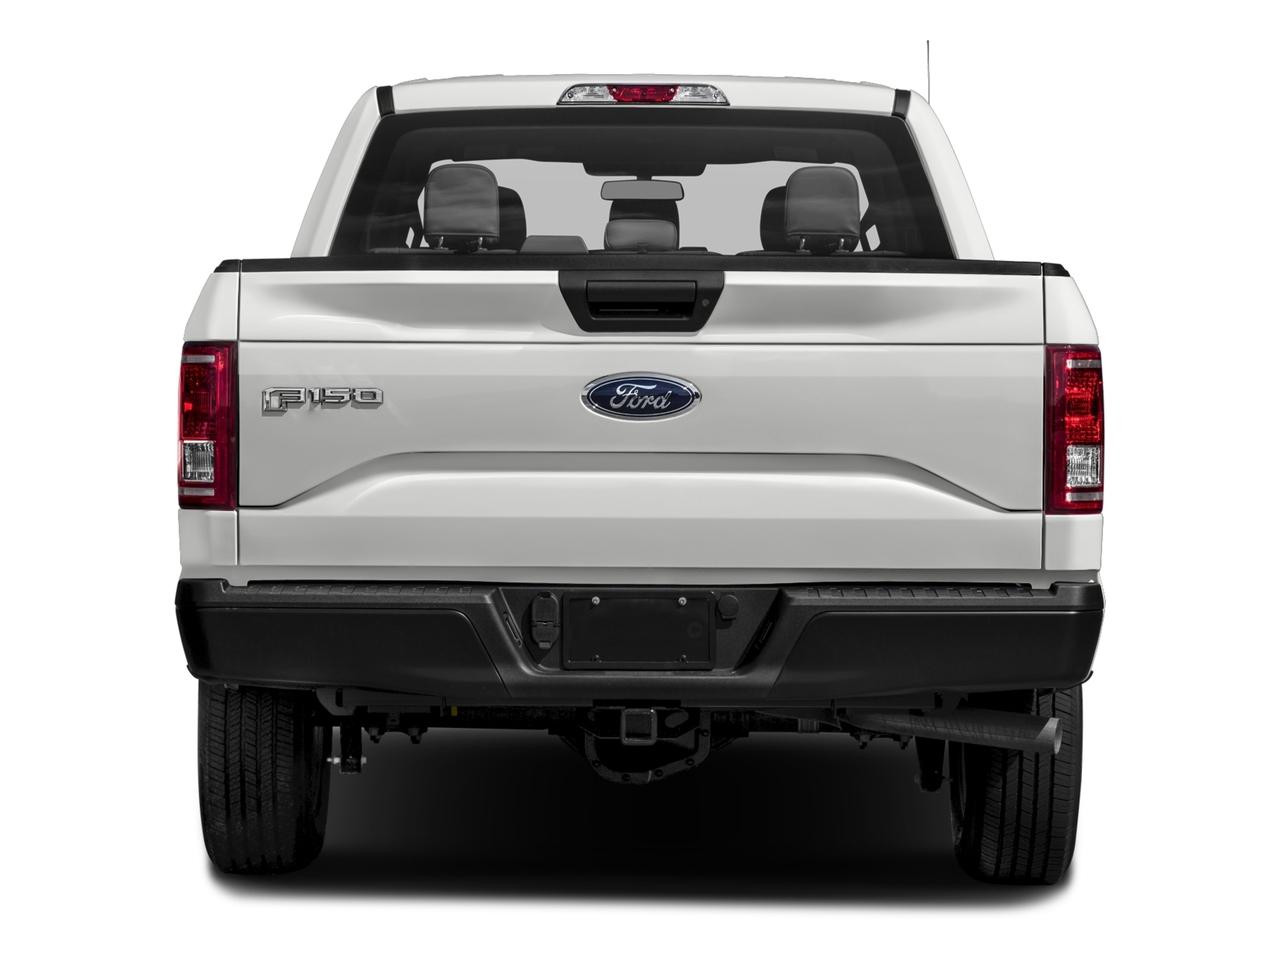 2017 Ford F-150 Vehicle Photo in Ft. Myers, FL 33907